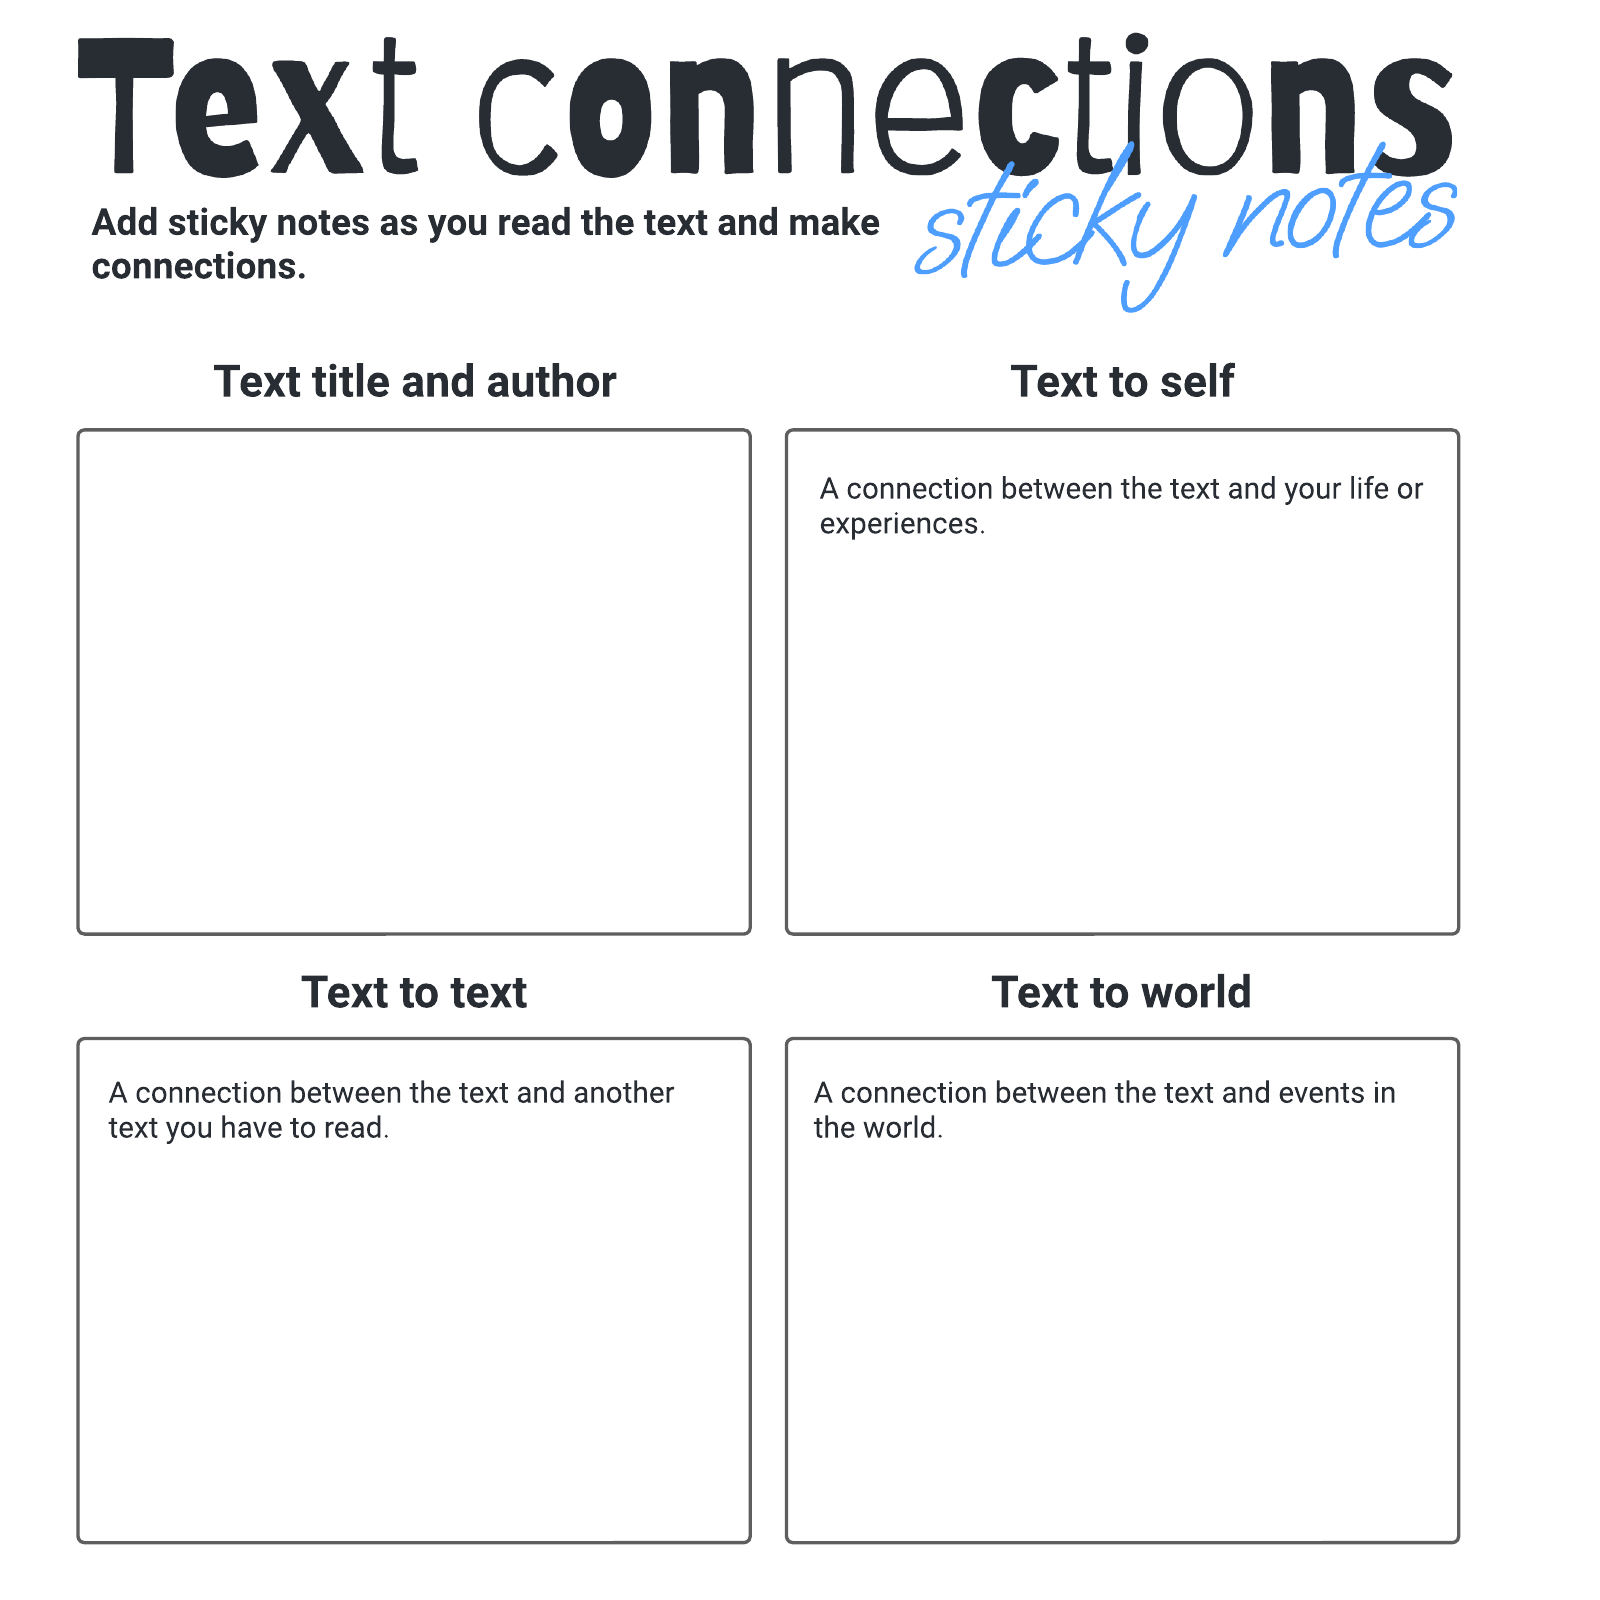 Text connections example